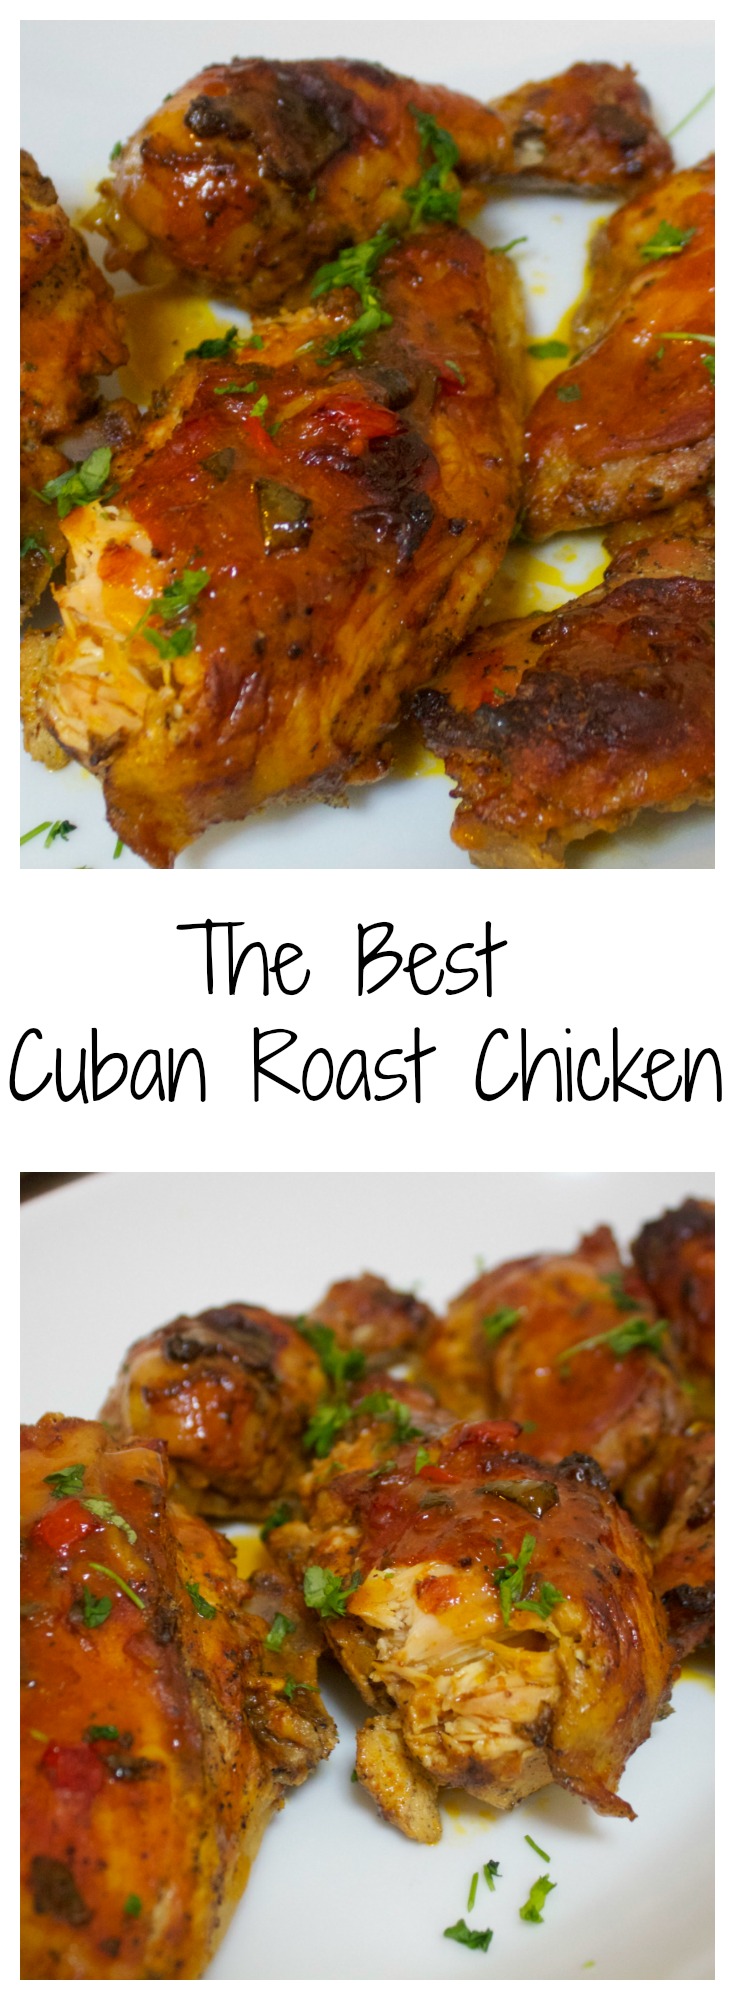 Try this Cuban Roast Chicken of Pollo Asado recipe from CookedbyJulie.com